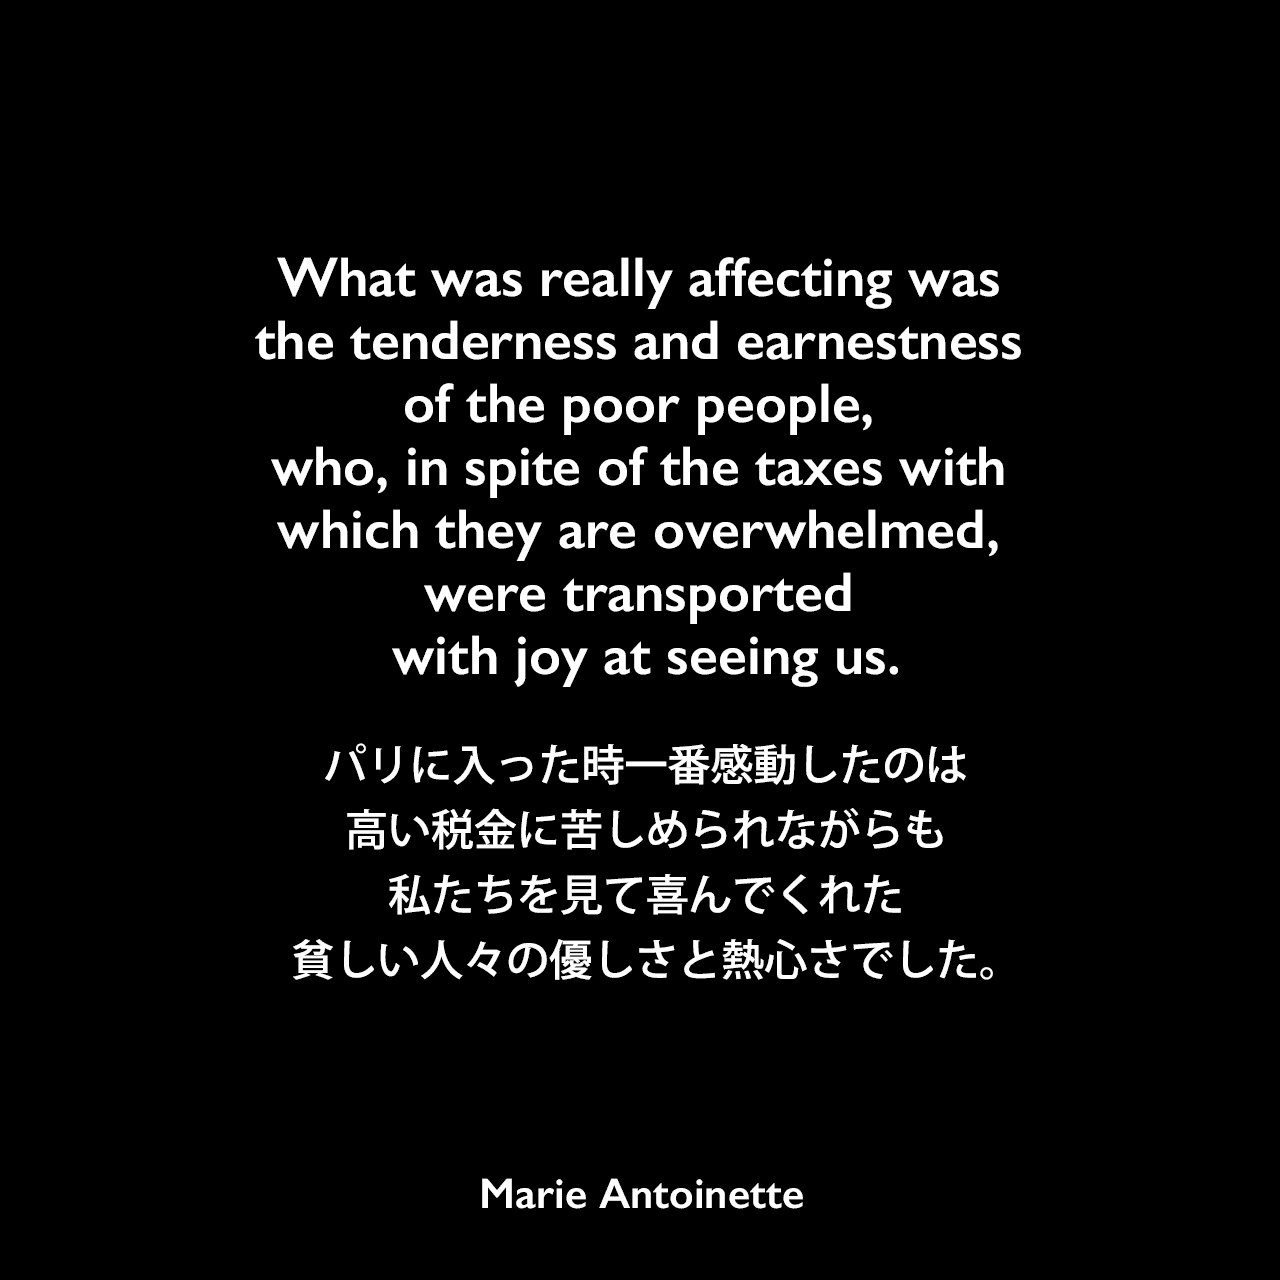 What was really affecting was the tenderness and earnestness of the poor people, who, in spite of the taxes with which they are overwhelmed, were transported with joy at seeing us.パリに入った時一番感動したのは、高い税金に苦しめられながらも私たちを見て喜んでくれた貧しい人々の優しさと熱心さでした。Marie Antoinette